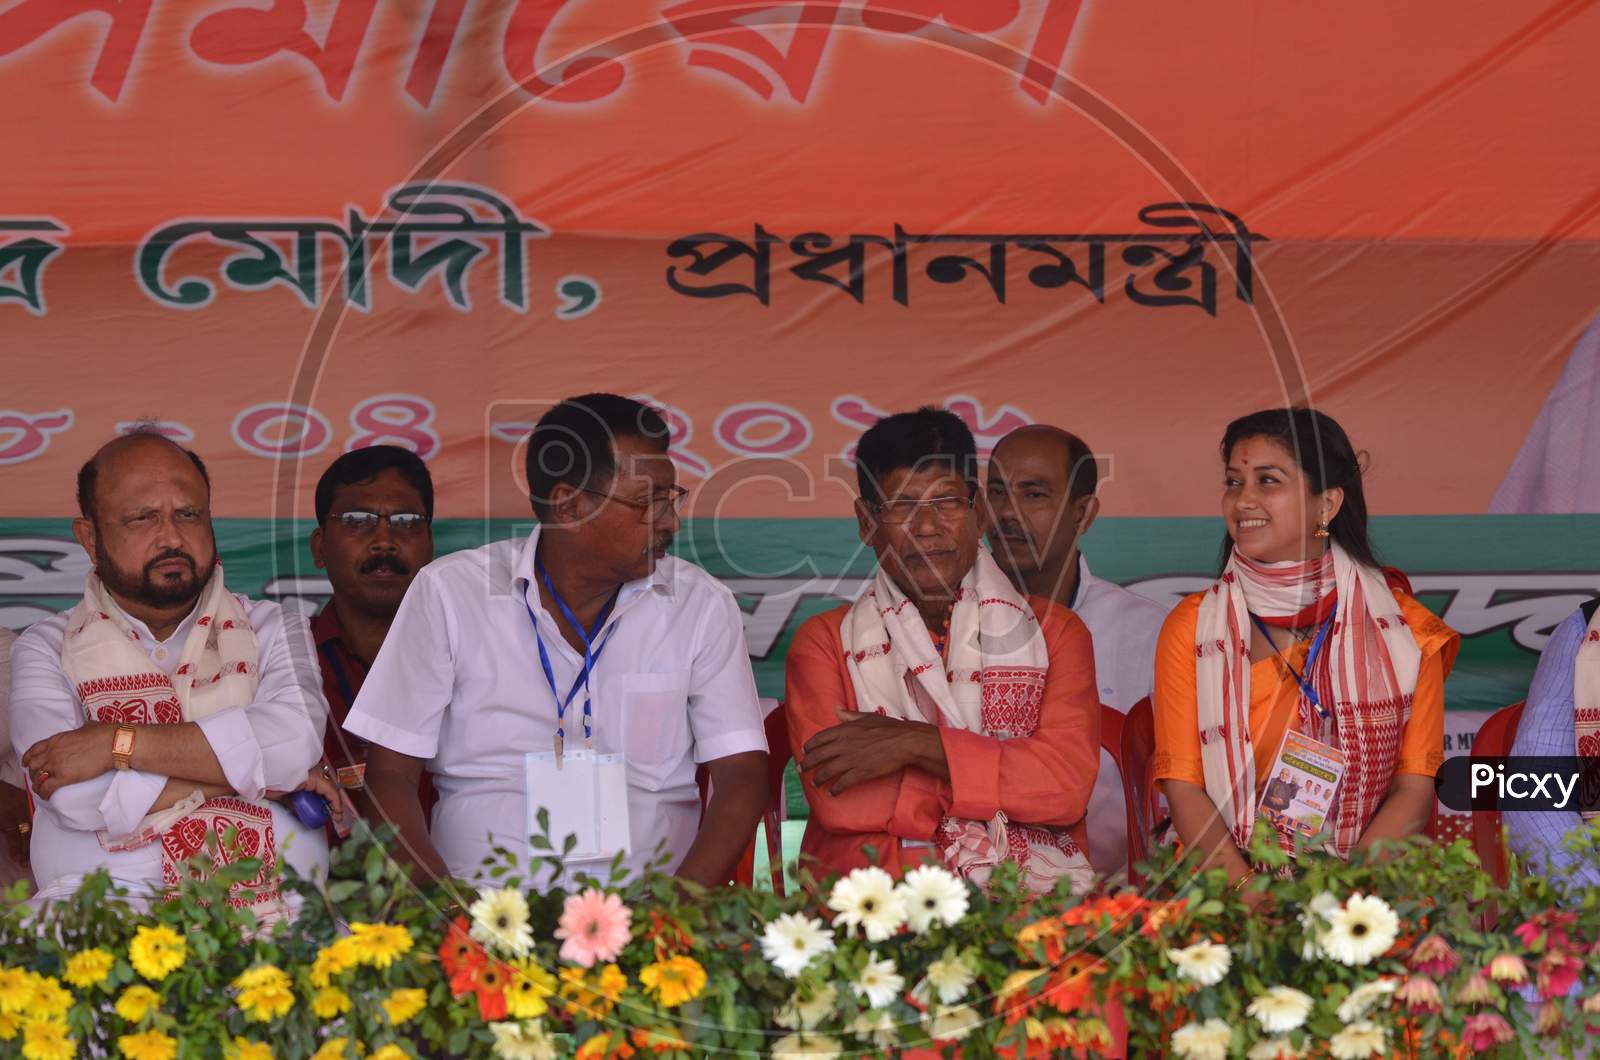 Assam BJP Leaders On Stage During an Election Campaign Rally